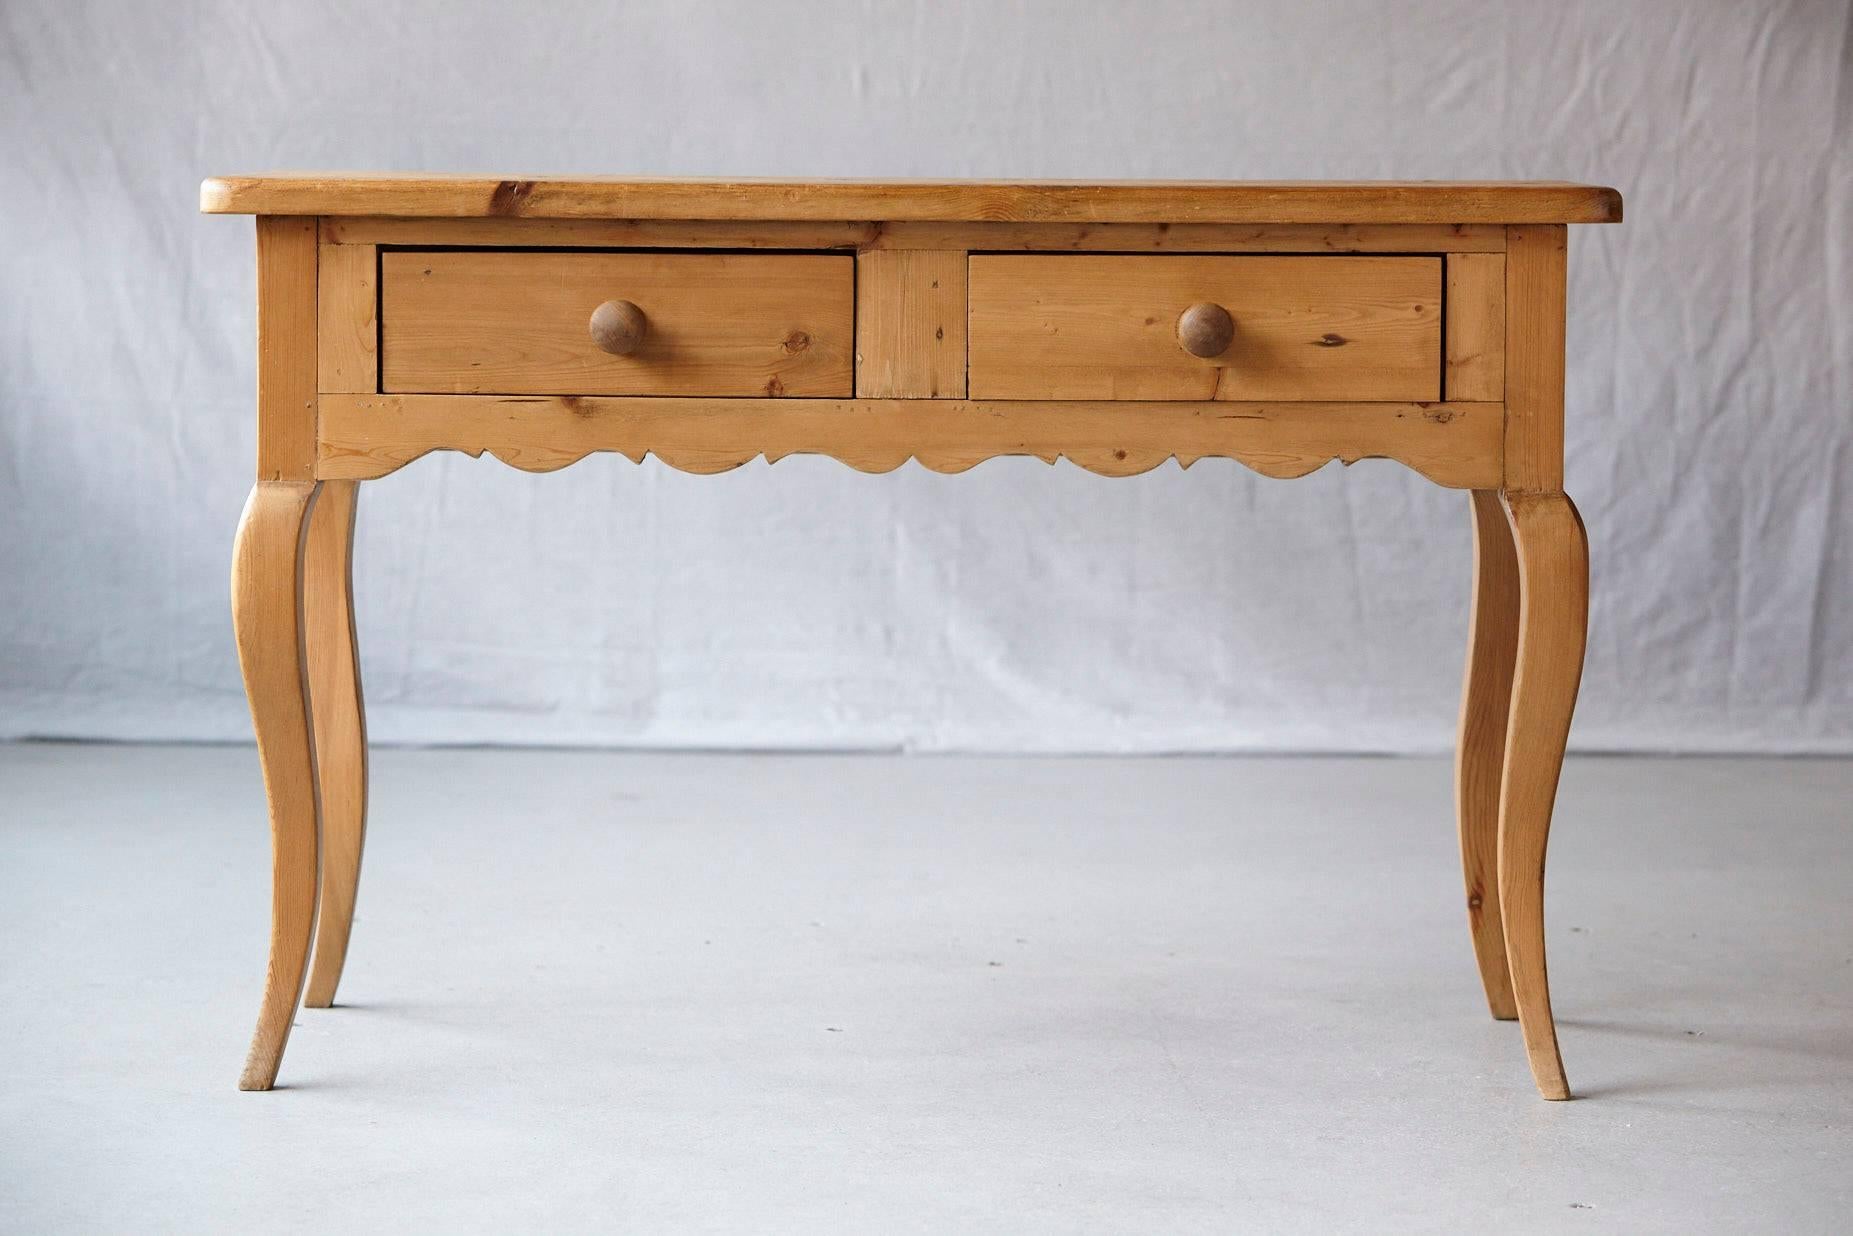 English Country style console in natural pine, with two drawers, shaped apron and raised on cabriole legs.
Made in England stamp under drawer.